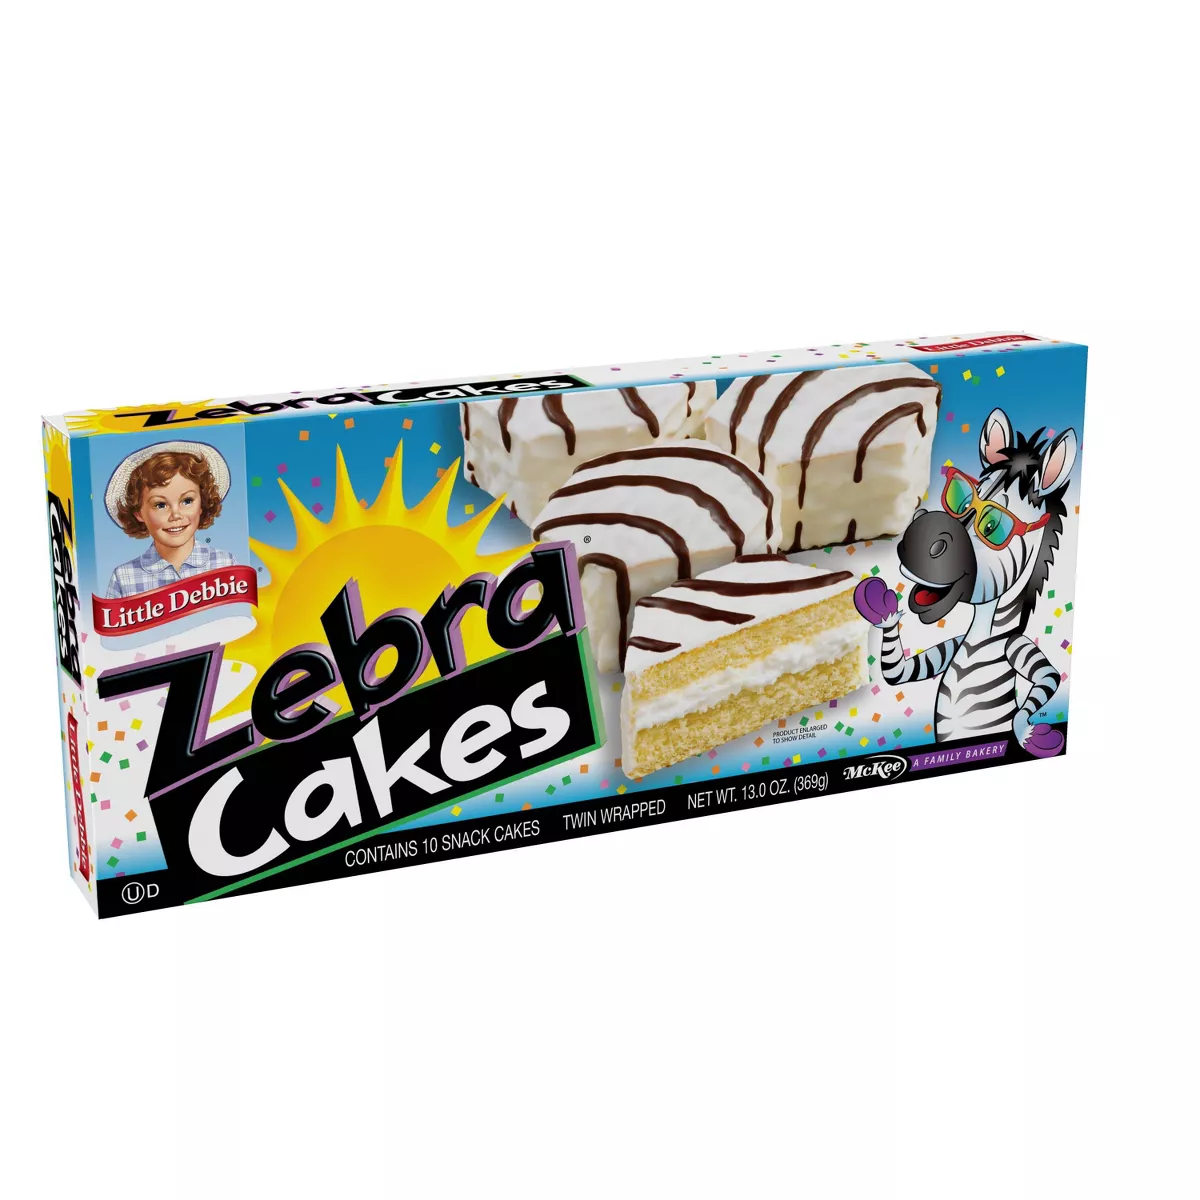 Junk Foods That Start With Z -Zebra Cakes